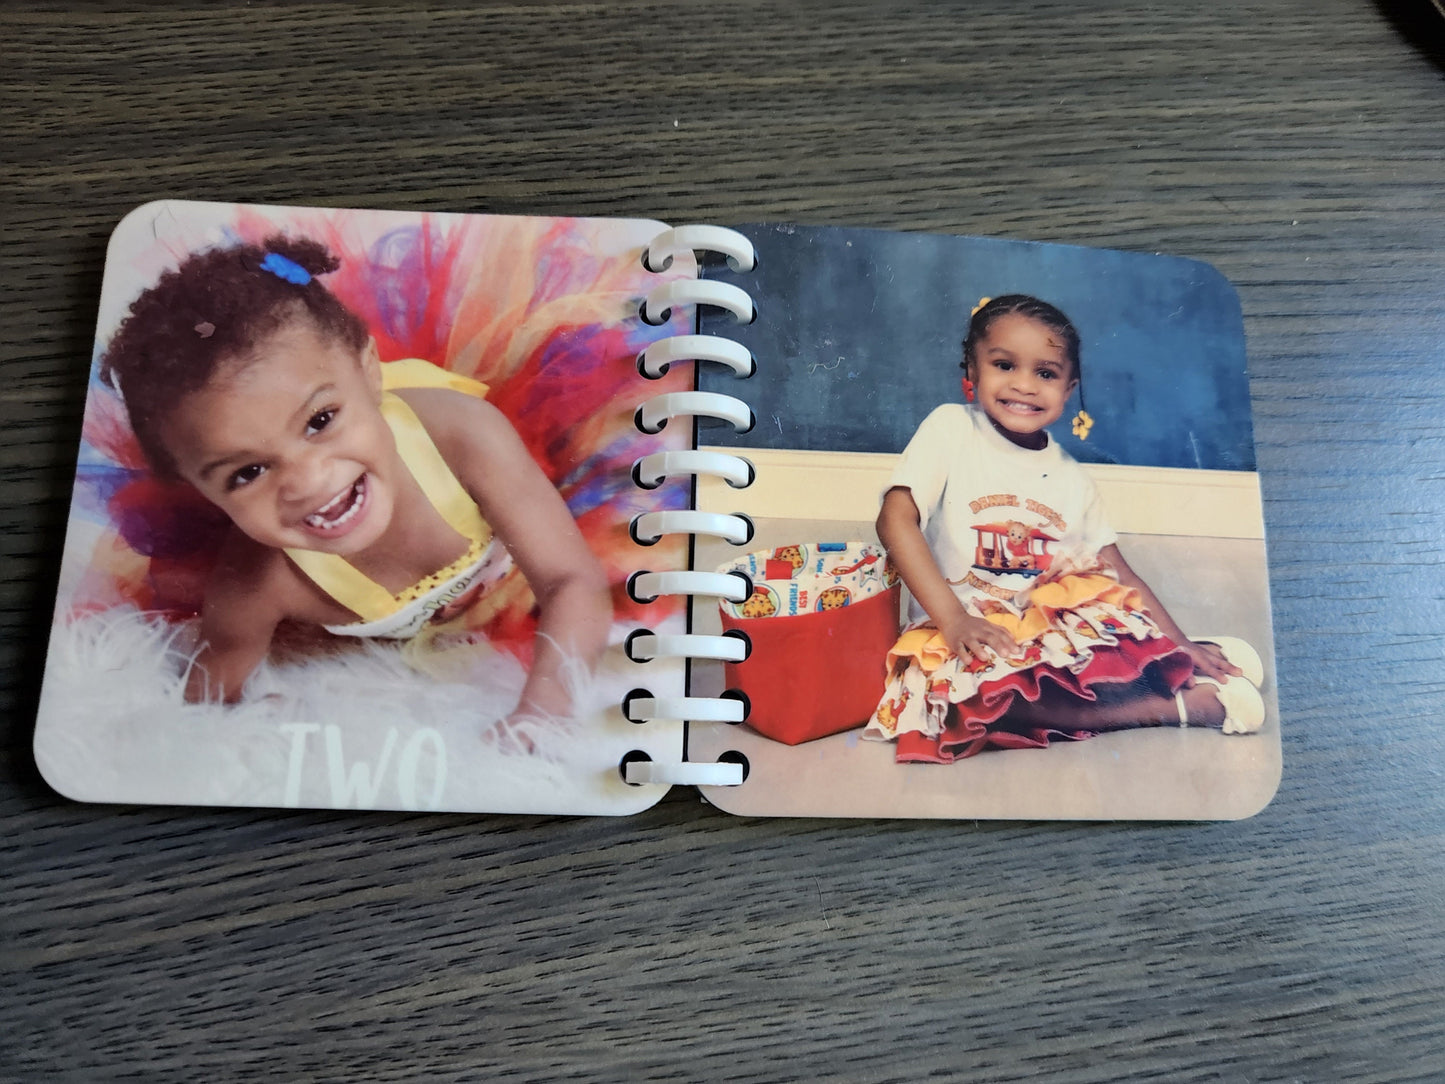 Personalized Memory book, photo 4 pages/8photos, flip book, keepsake book for babies to adults